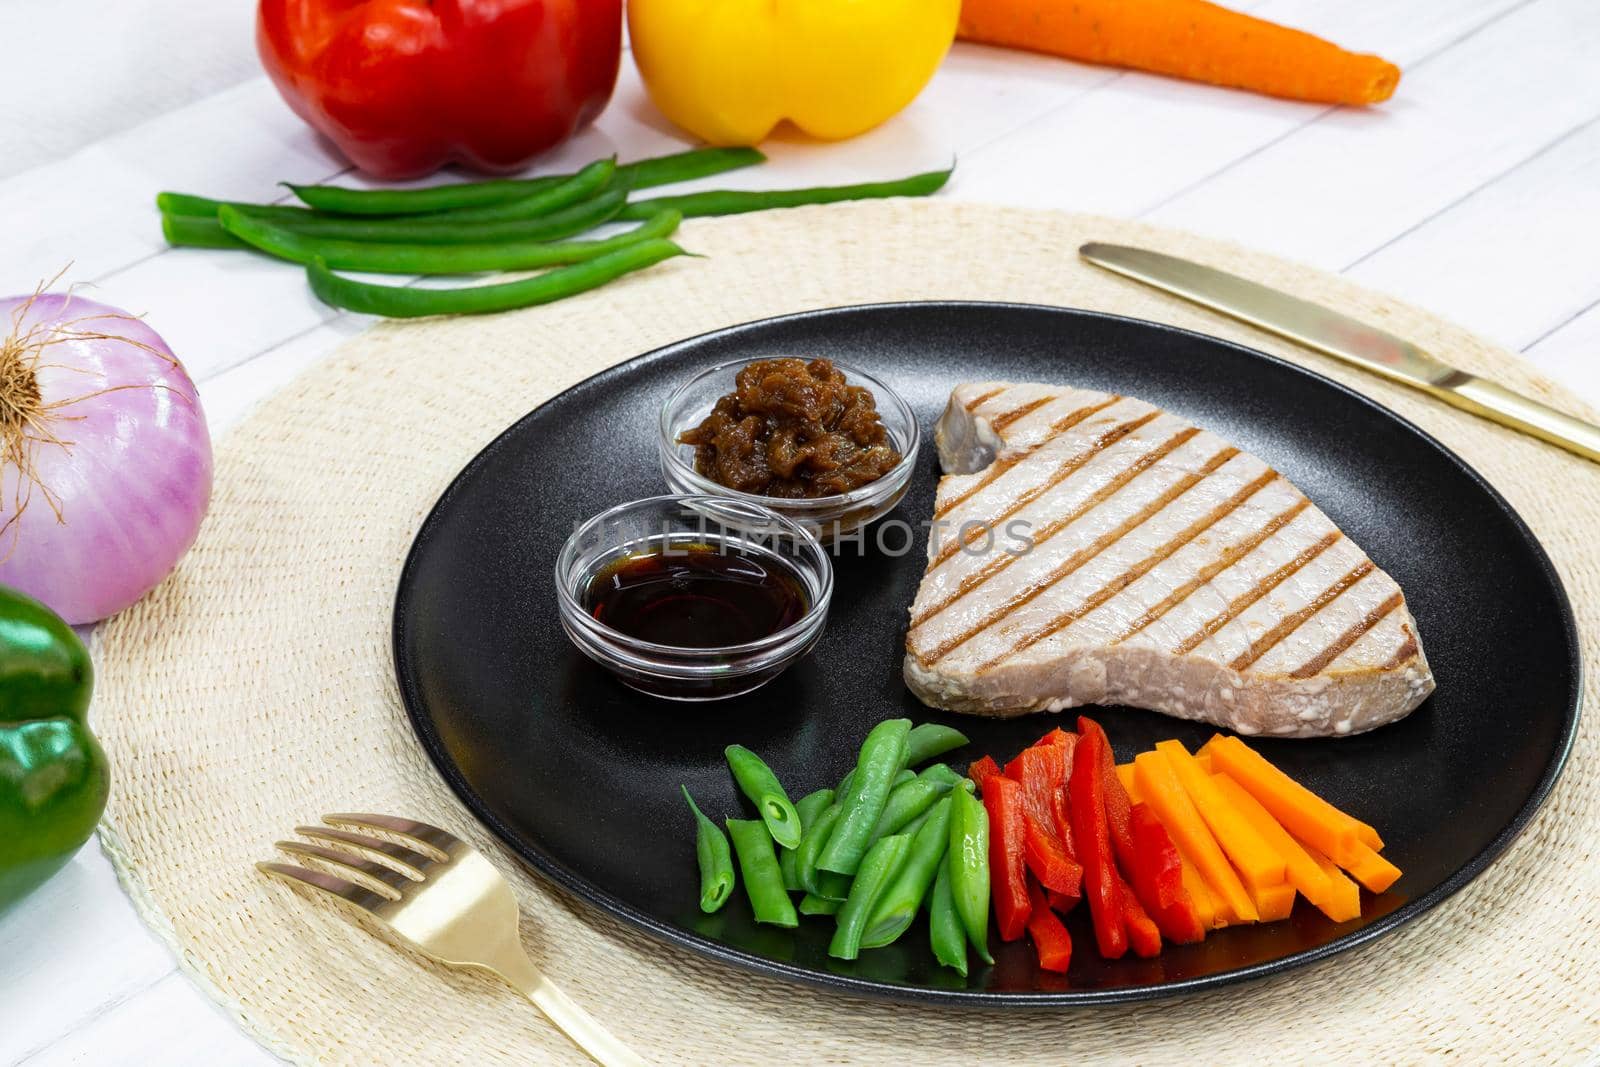 Grilled tuna steak on black plate with sauce, caramelized onion and fresh vegetables by apavlin